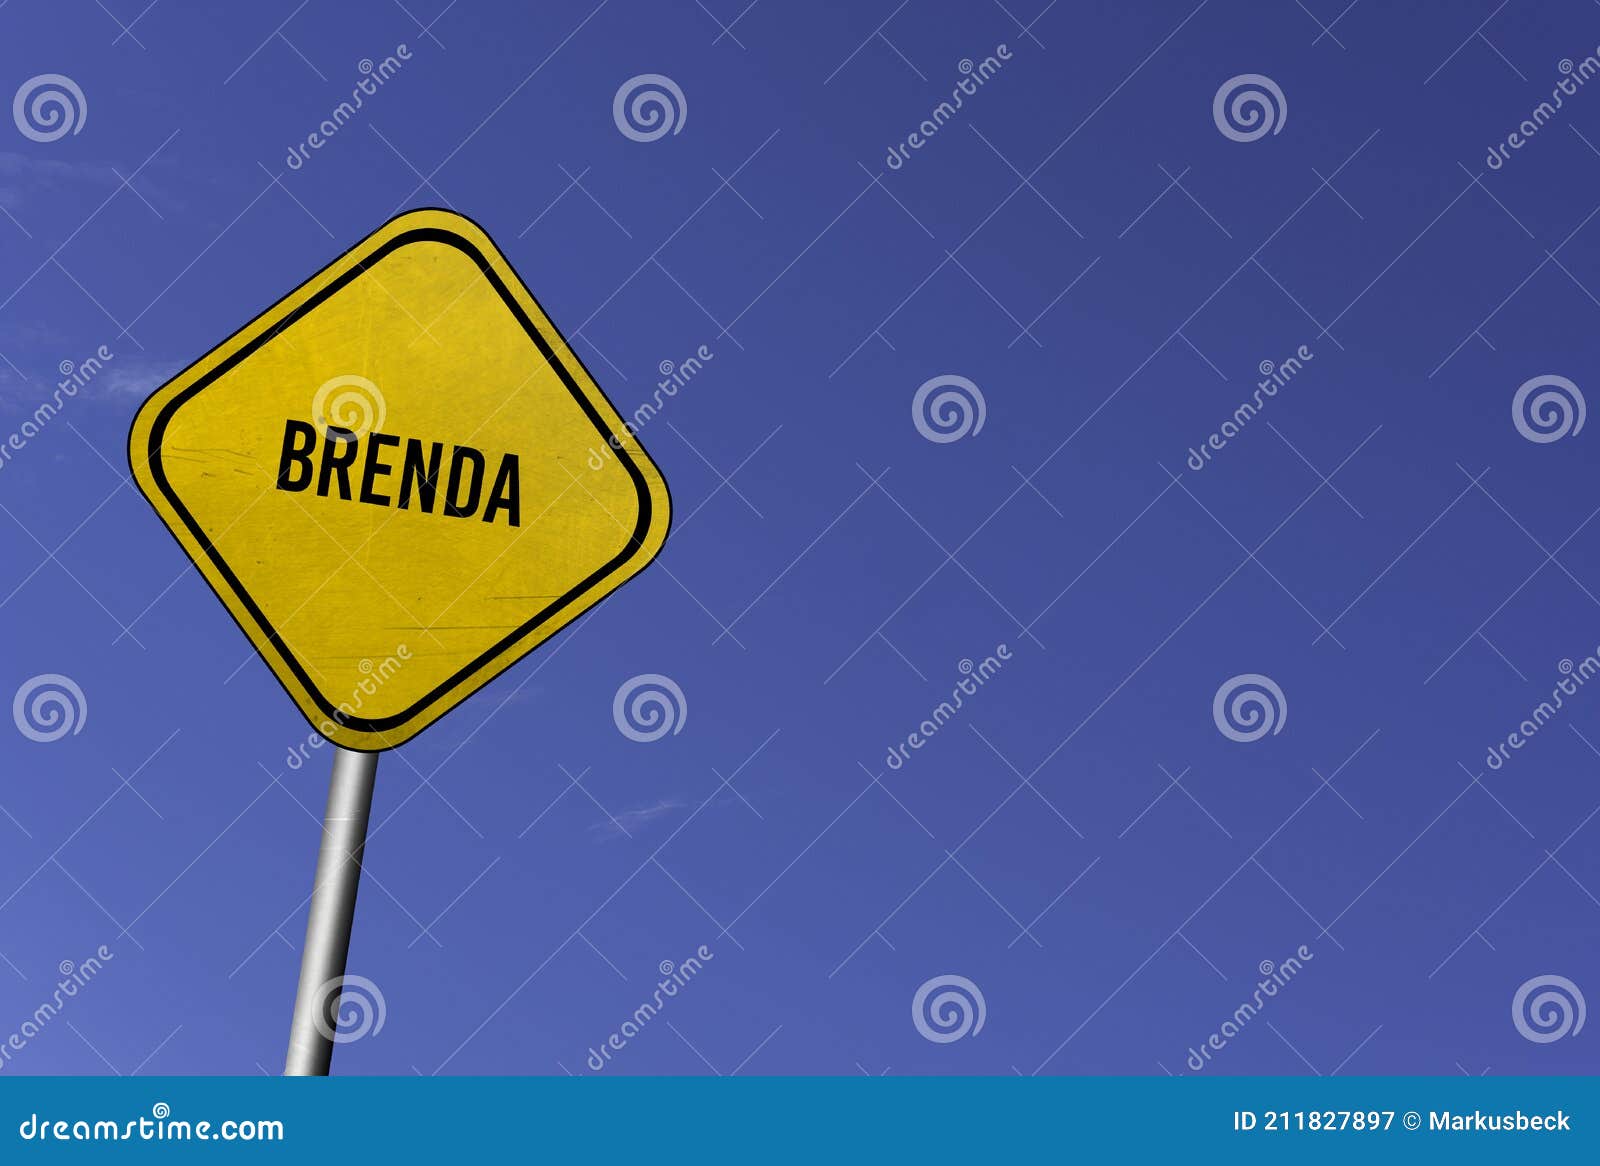 brenda - yellow sign with blue sky background